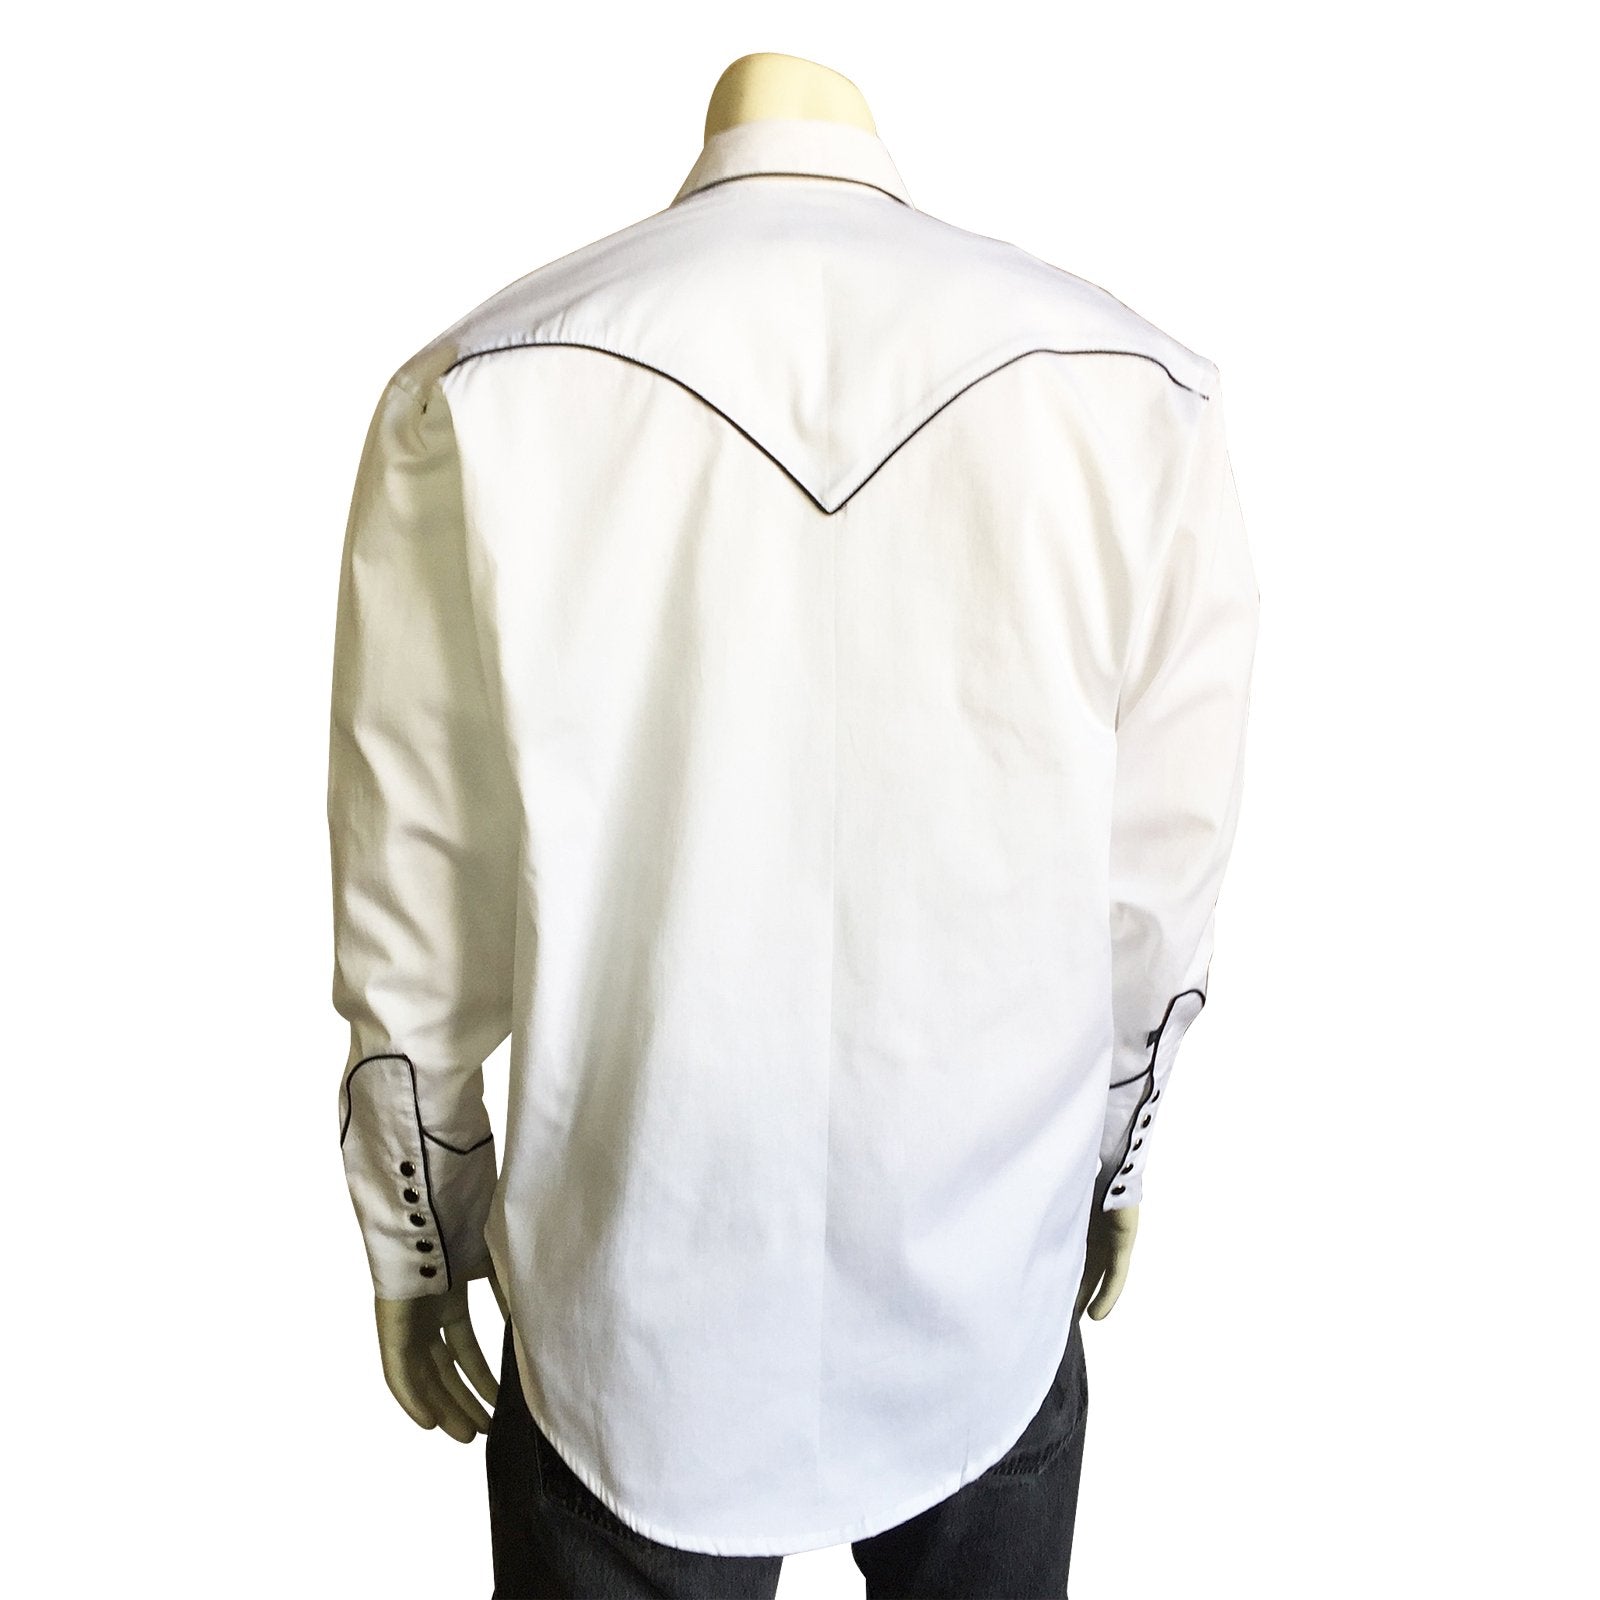 Rockmount Ranch Wear Men's Vintage Inspired Western Shirt White Black Piping Front #176799B